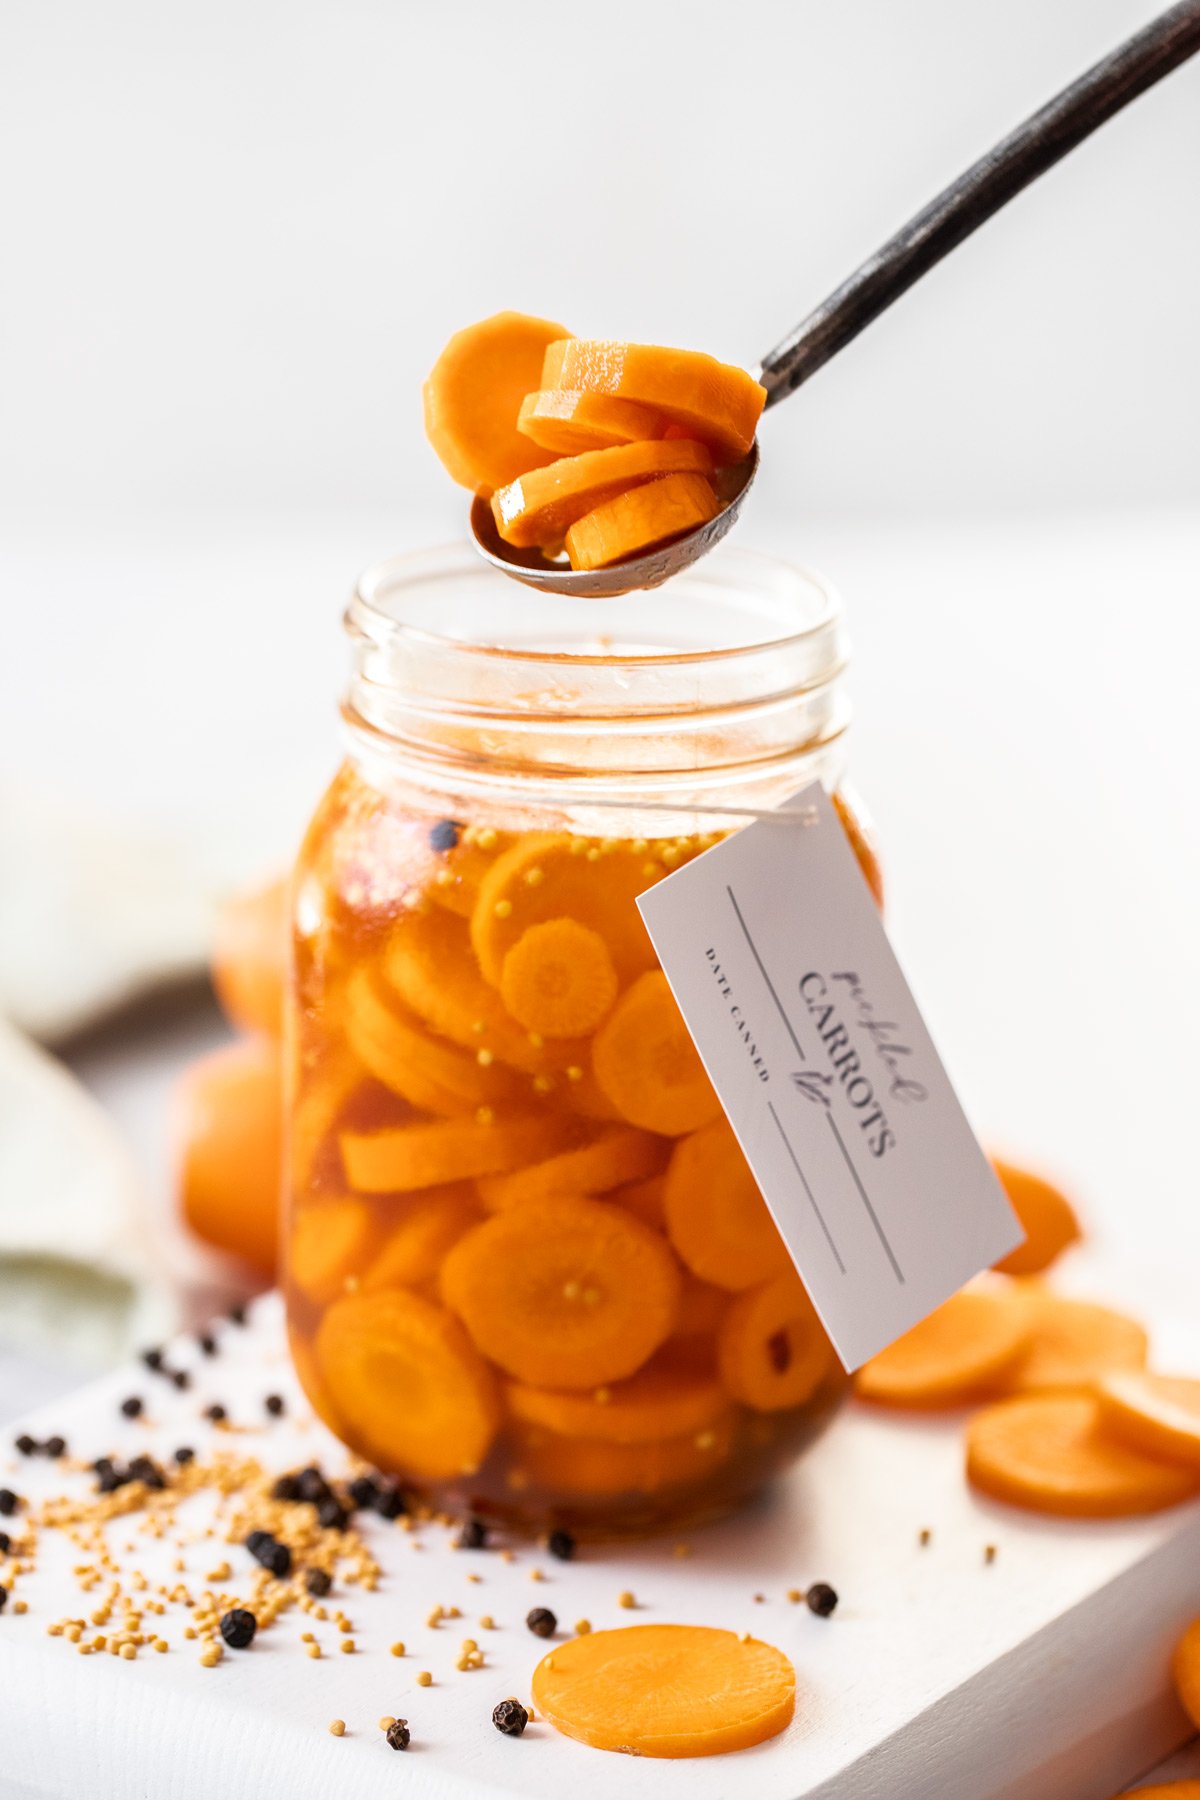 Jar of Pickled Carrots, with a spoon reaching in to lift some pickles out of the jar.